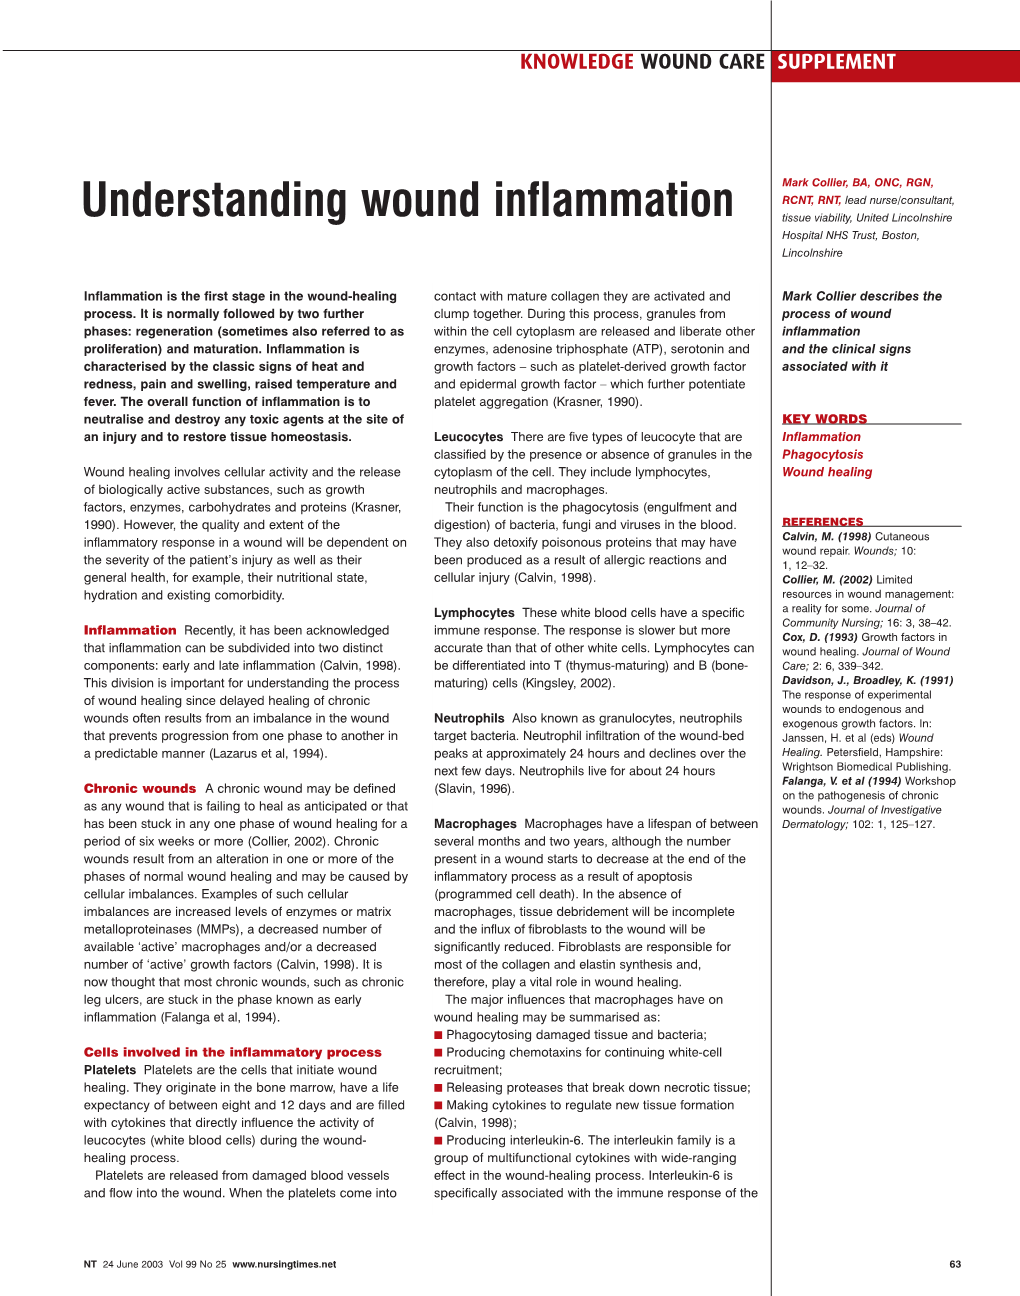 Understanding Wound Inflammation Tissue Viability, United Lincolnshire Hospital NHS Trust, Boston, Lincolnshire